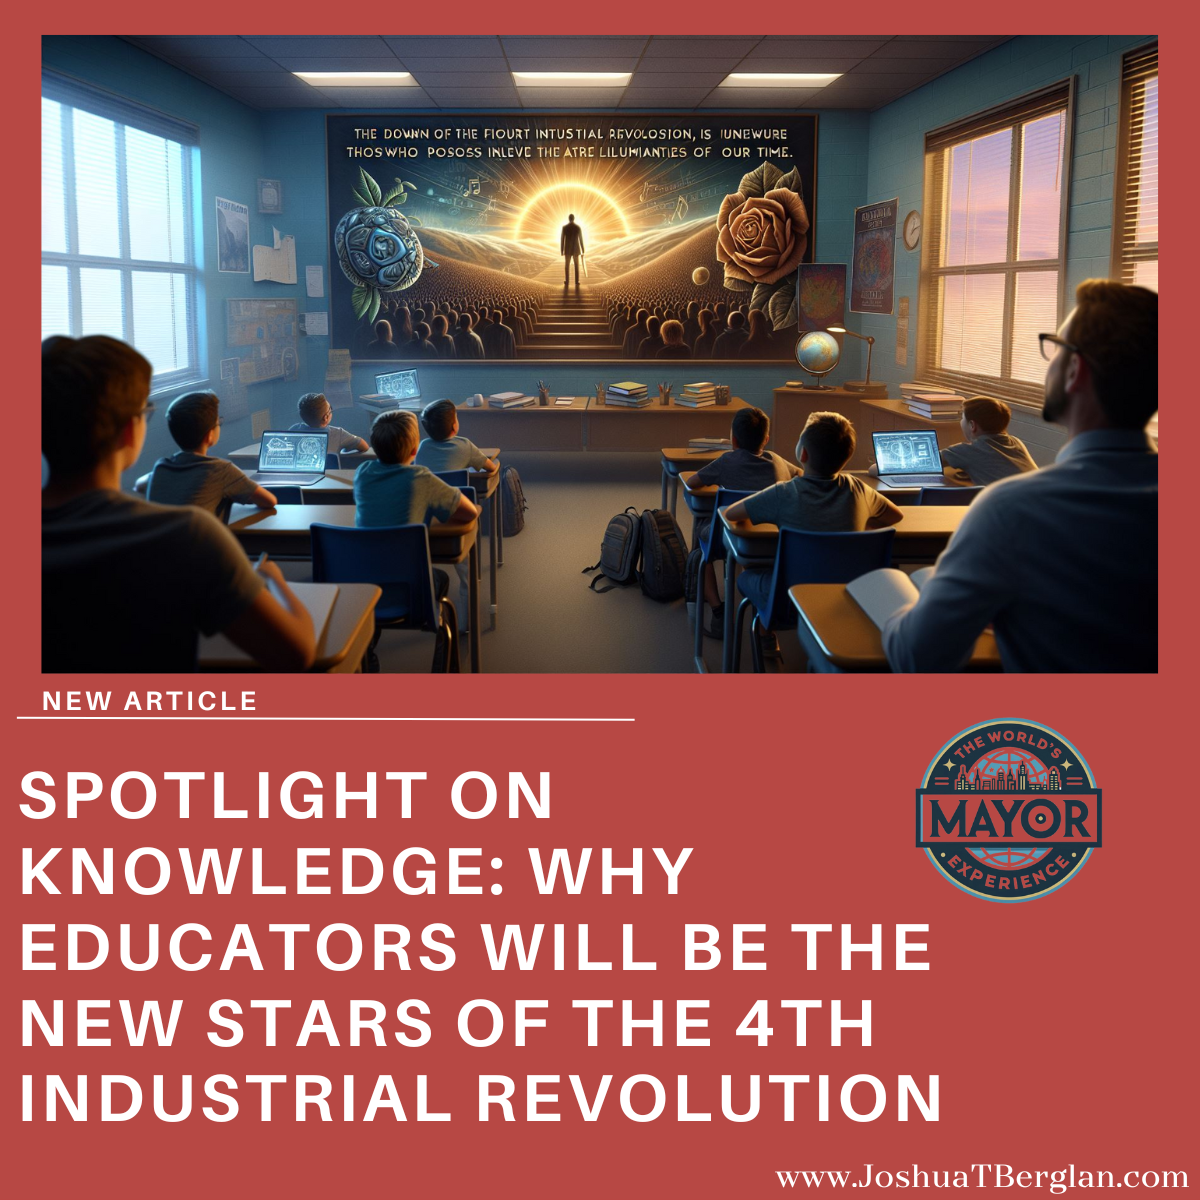 Spotlight on Knowledge: Why Educators Will Be the New Stars of the 4th Industrial Revolution